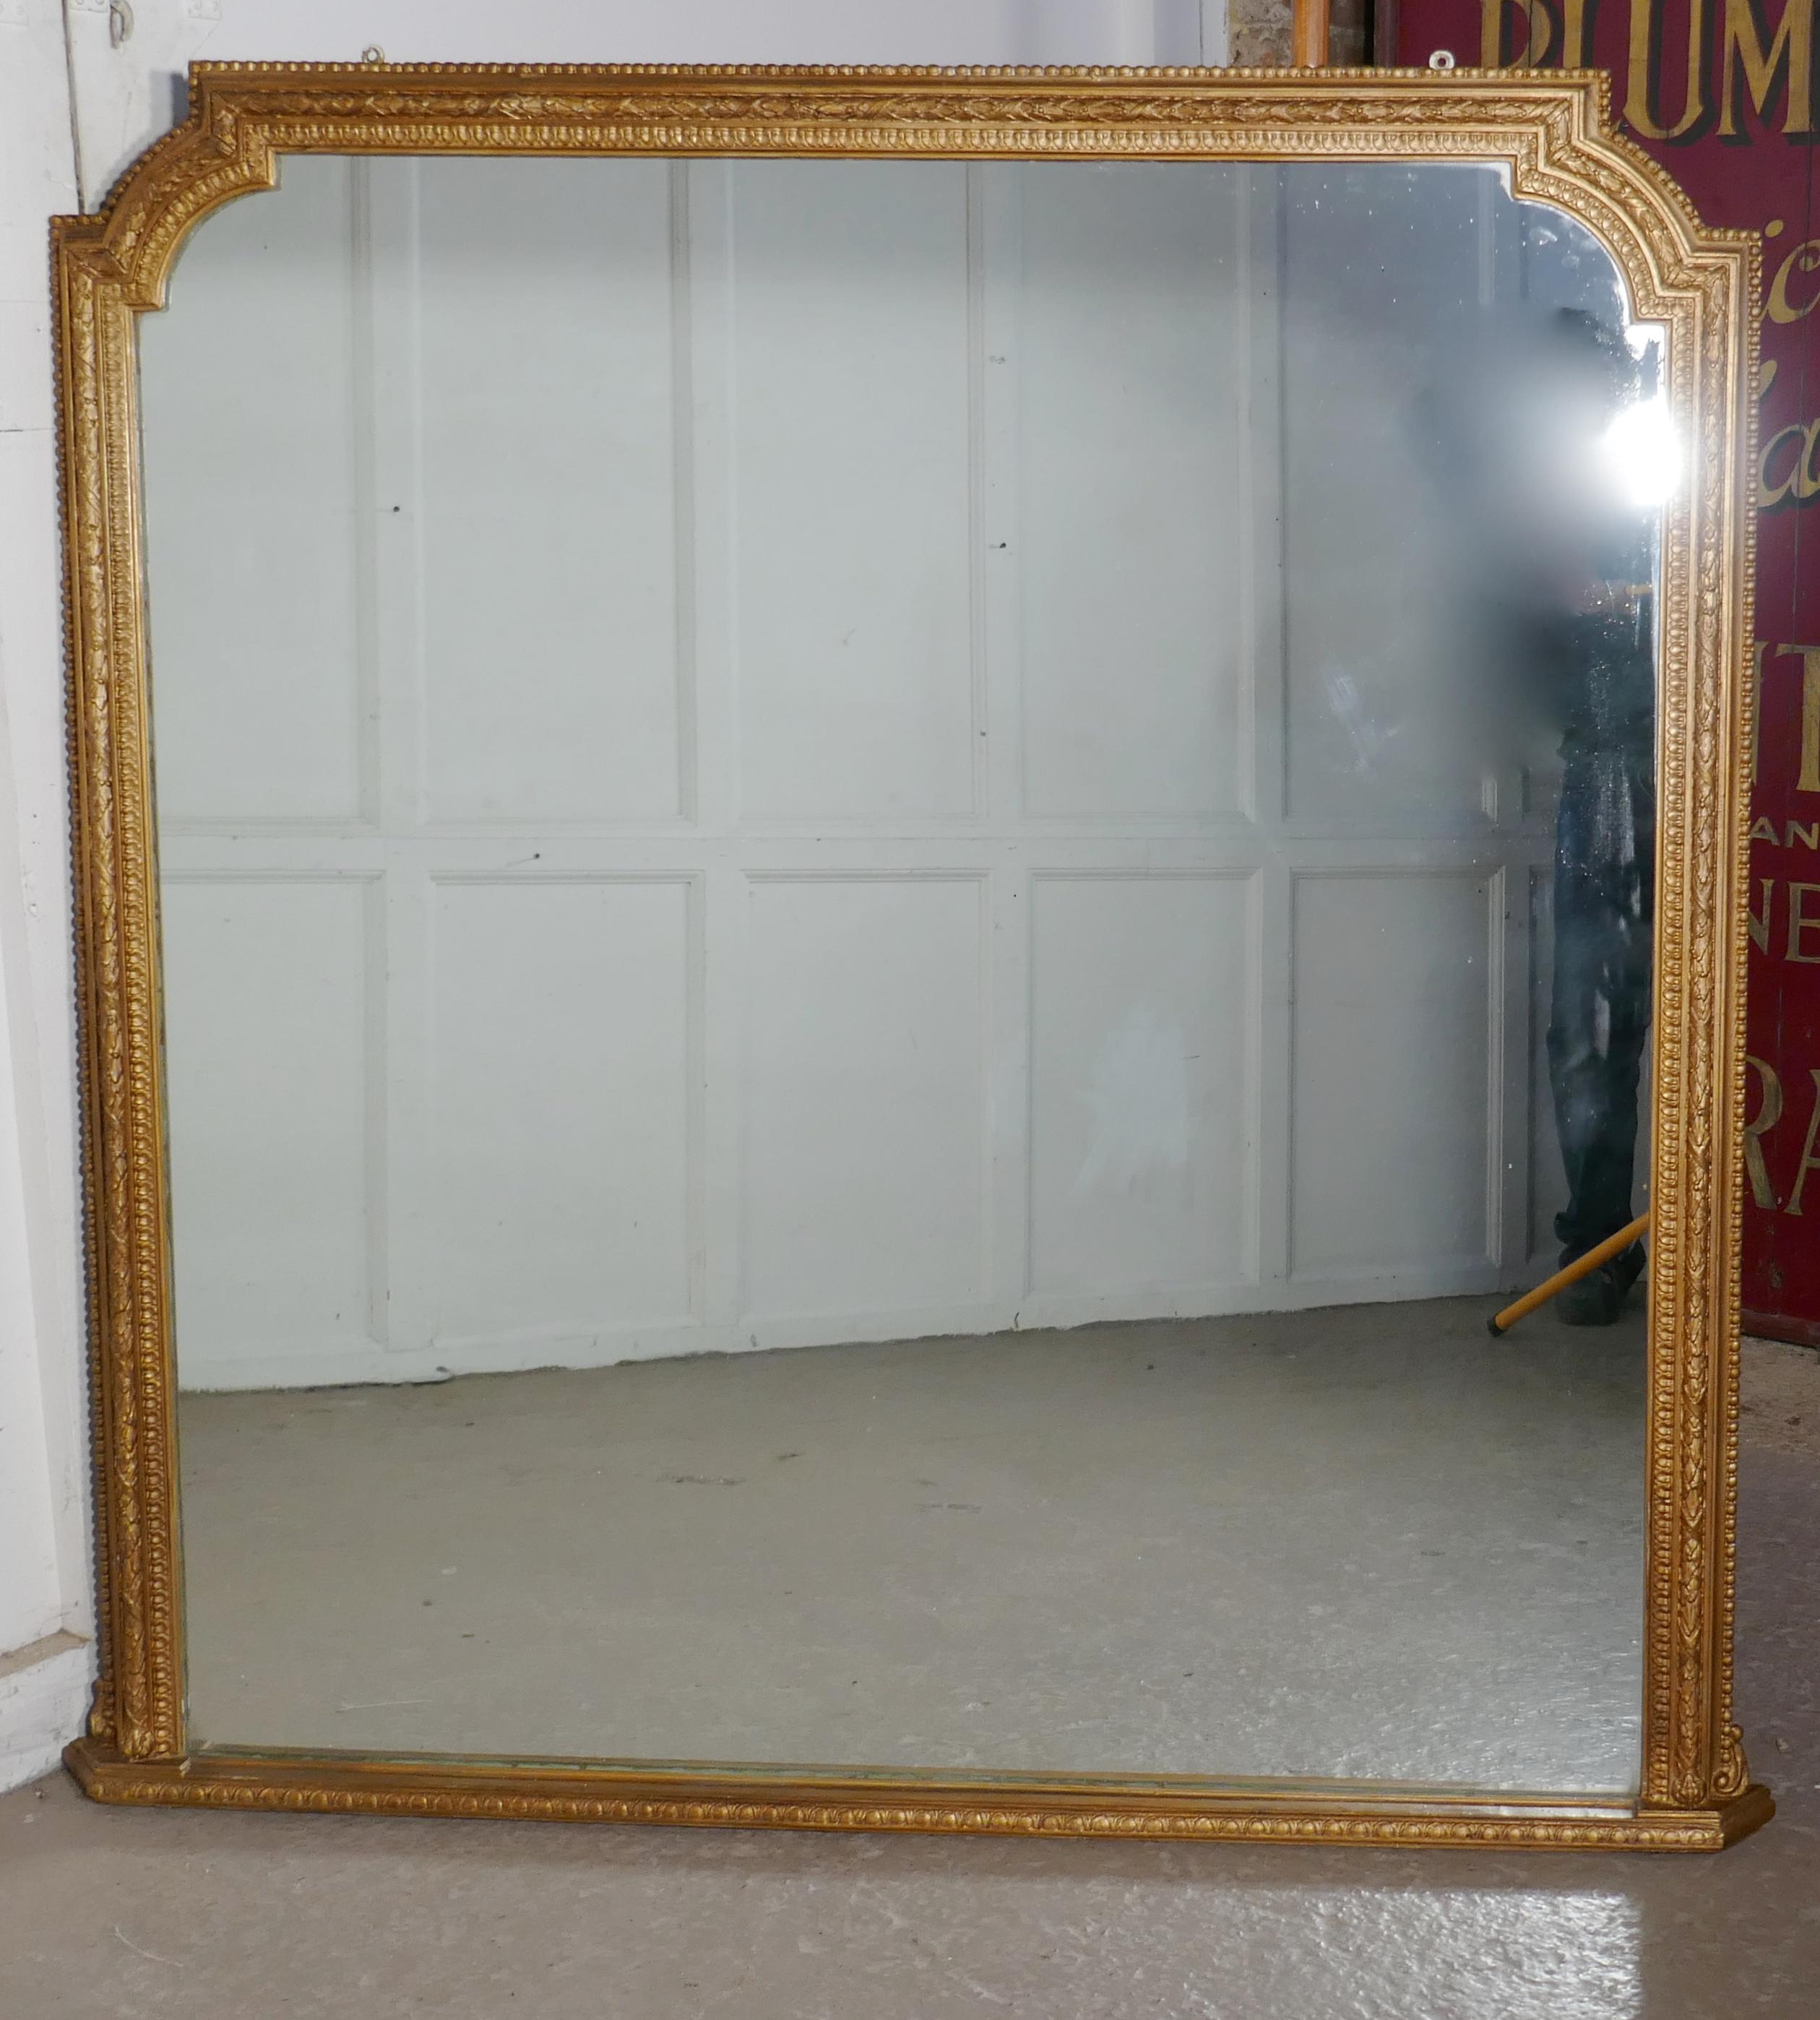 Very large gilt overmantel or over mantle mirror

The over mantel as it name implies was made to sit over the mantel piece and as so many fireplaces are opposite the window Mirrors were used to reflect more light into the room
The old gold frame